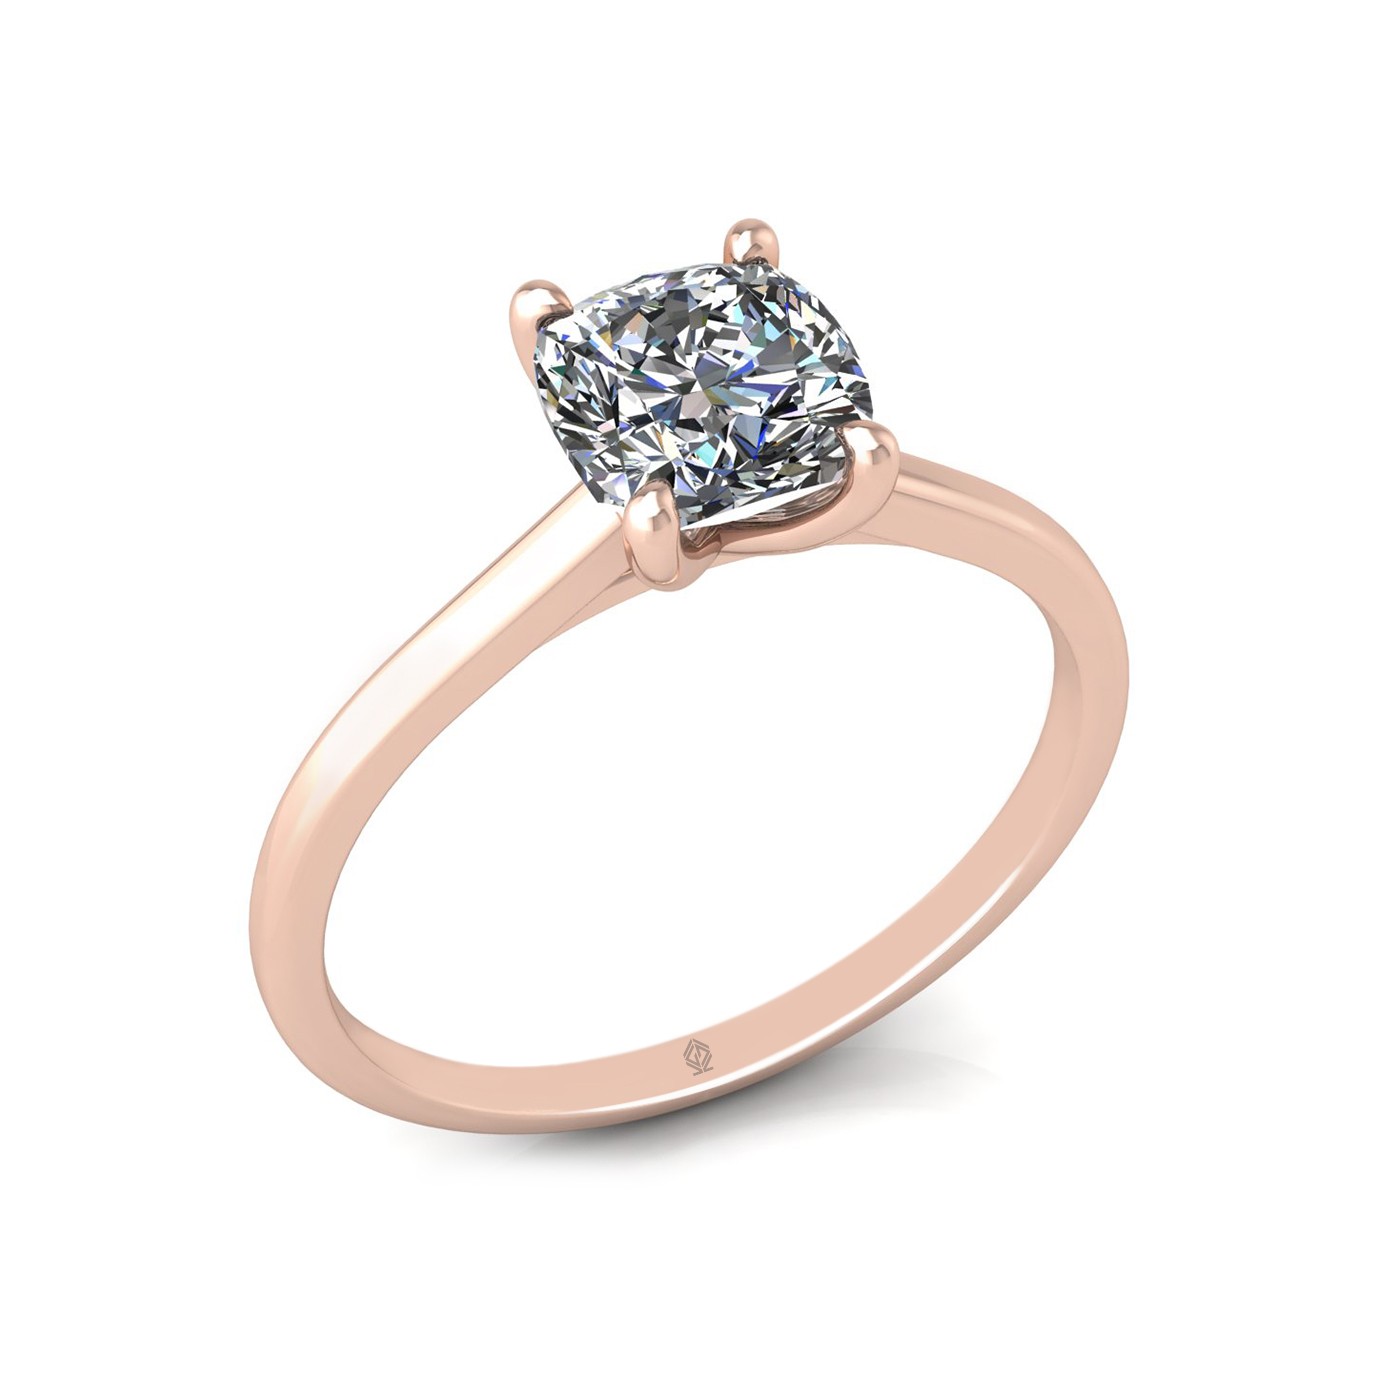 18k rose gold 1.2ct 4 prongs solitaire cushion cut diamond engagement ring with whisper thin band